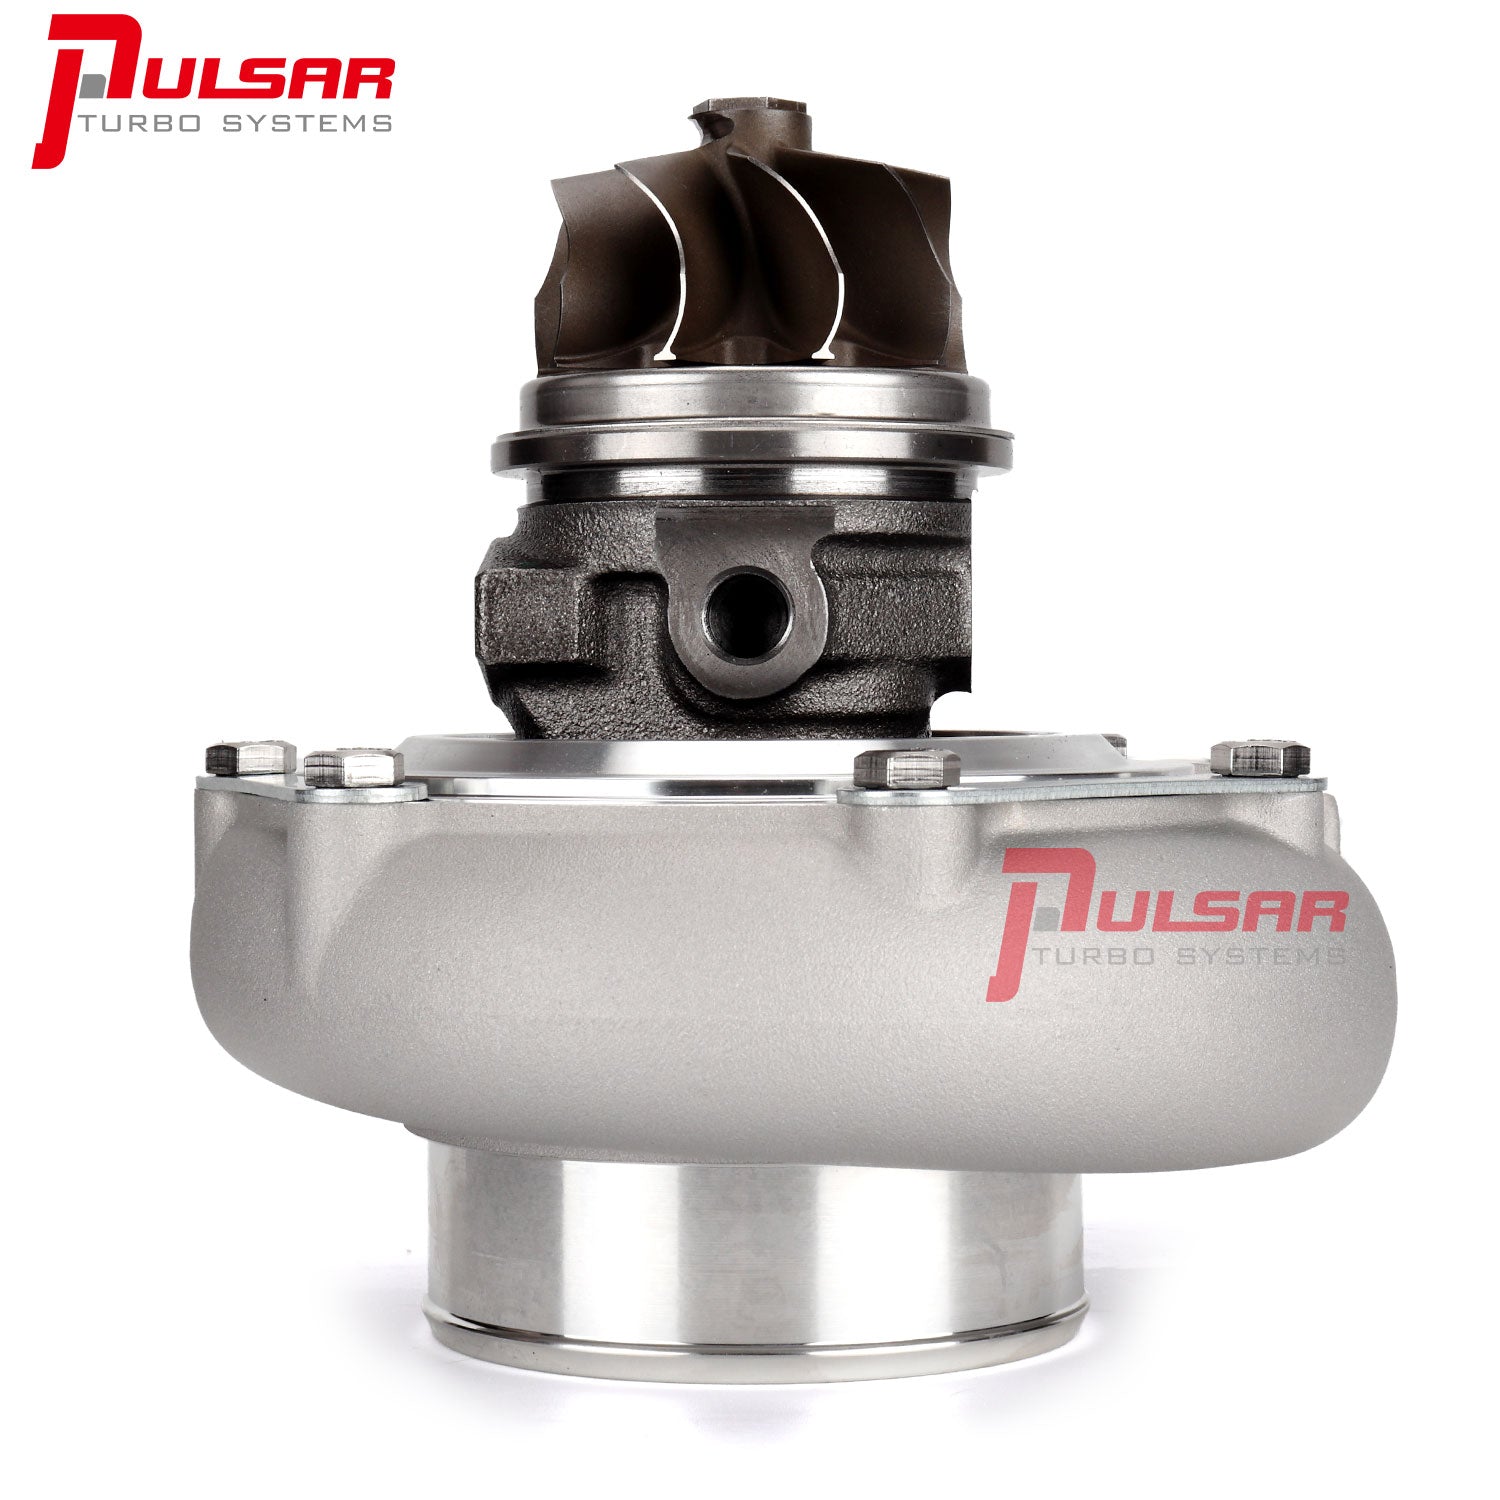 PULSAR Next GEN PSR3584 Supercore for Ford Falcon to replace the factory GT3582R